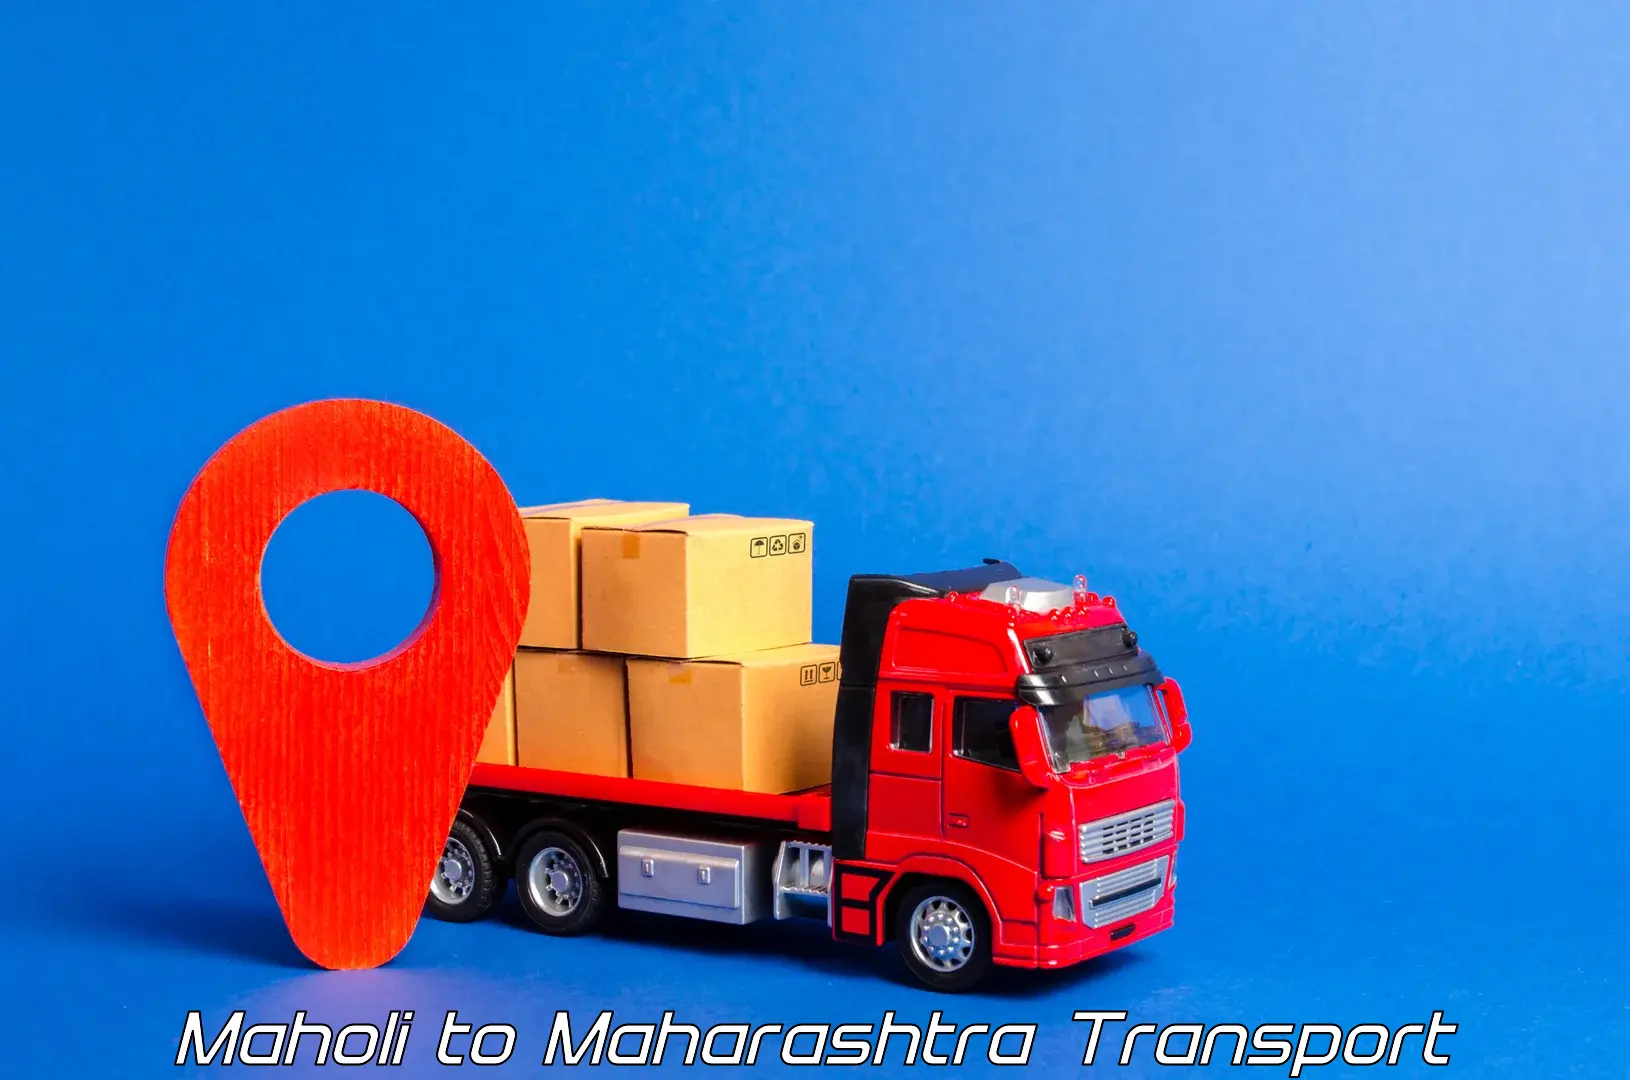 Commercial transport service Maholi to Talere